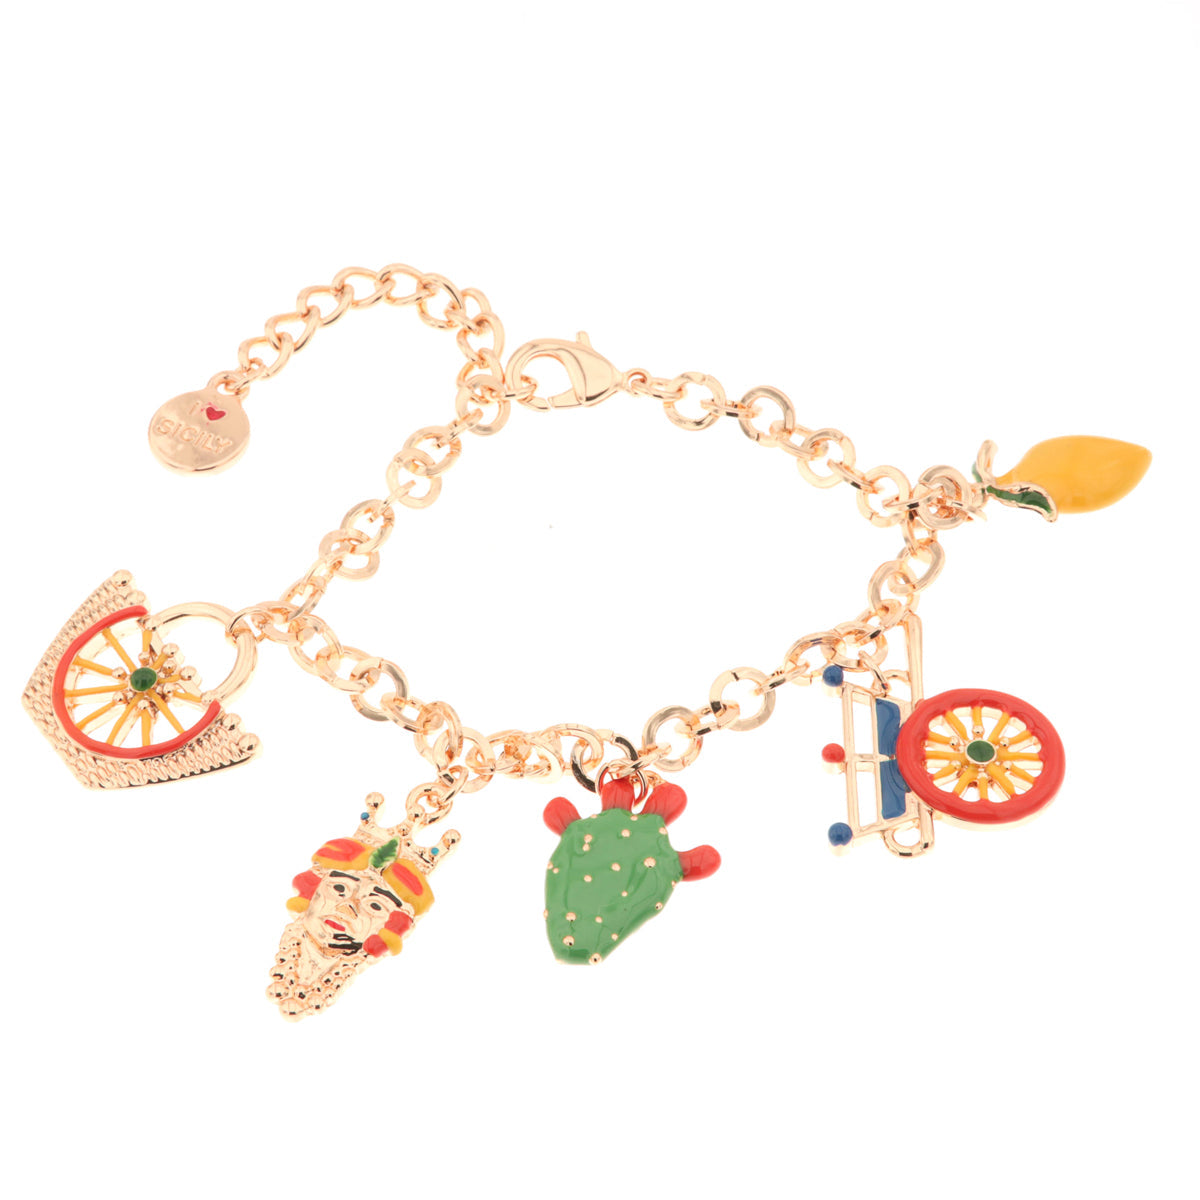 Rose gold metal bracelet with colored charms Sicily, Limone, Coffa, Moro head